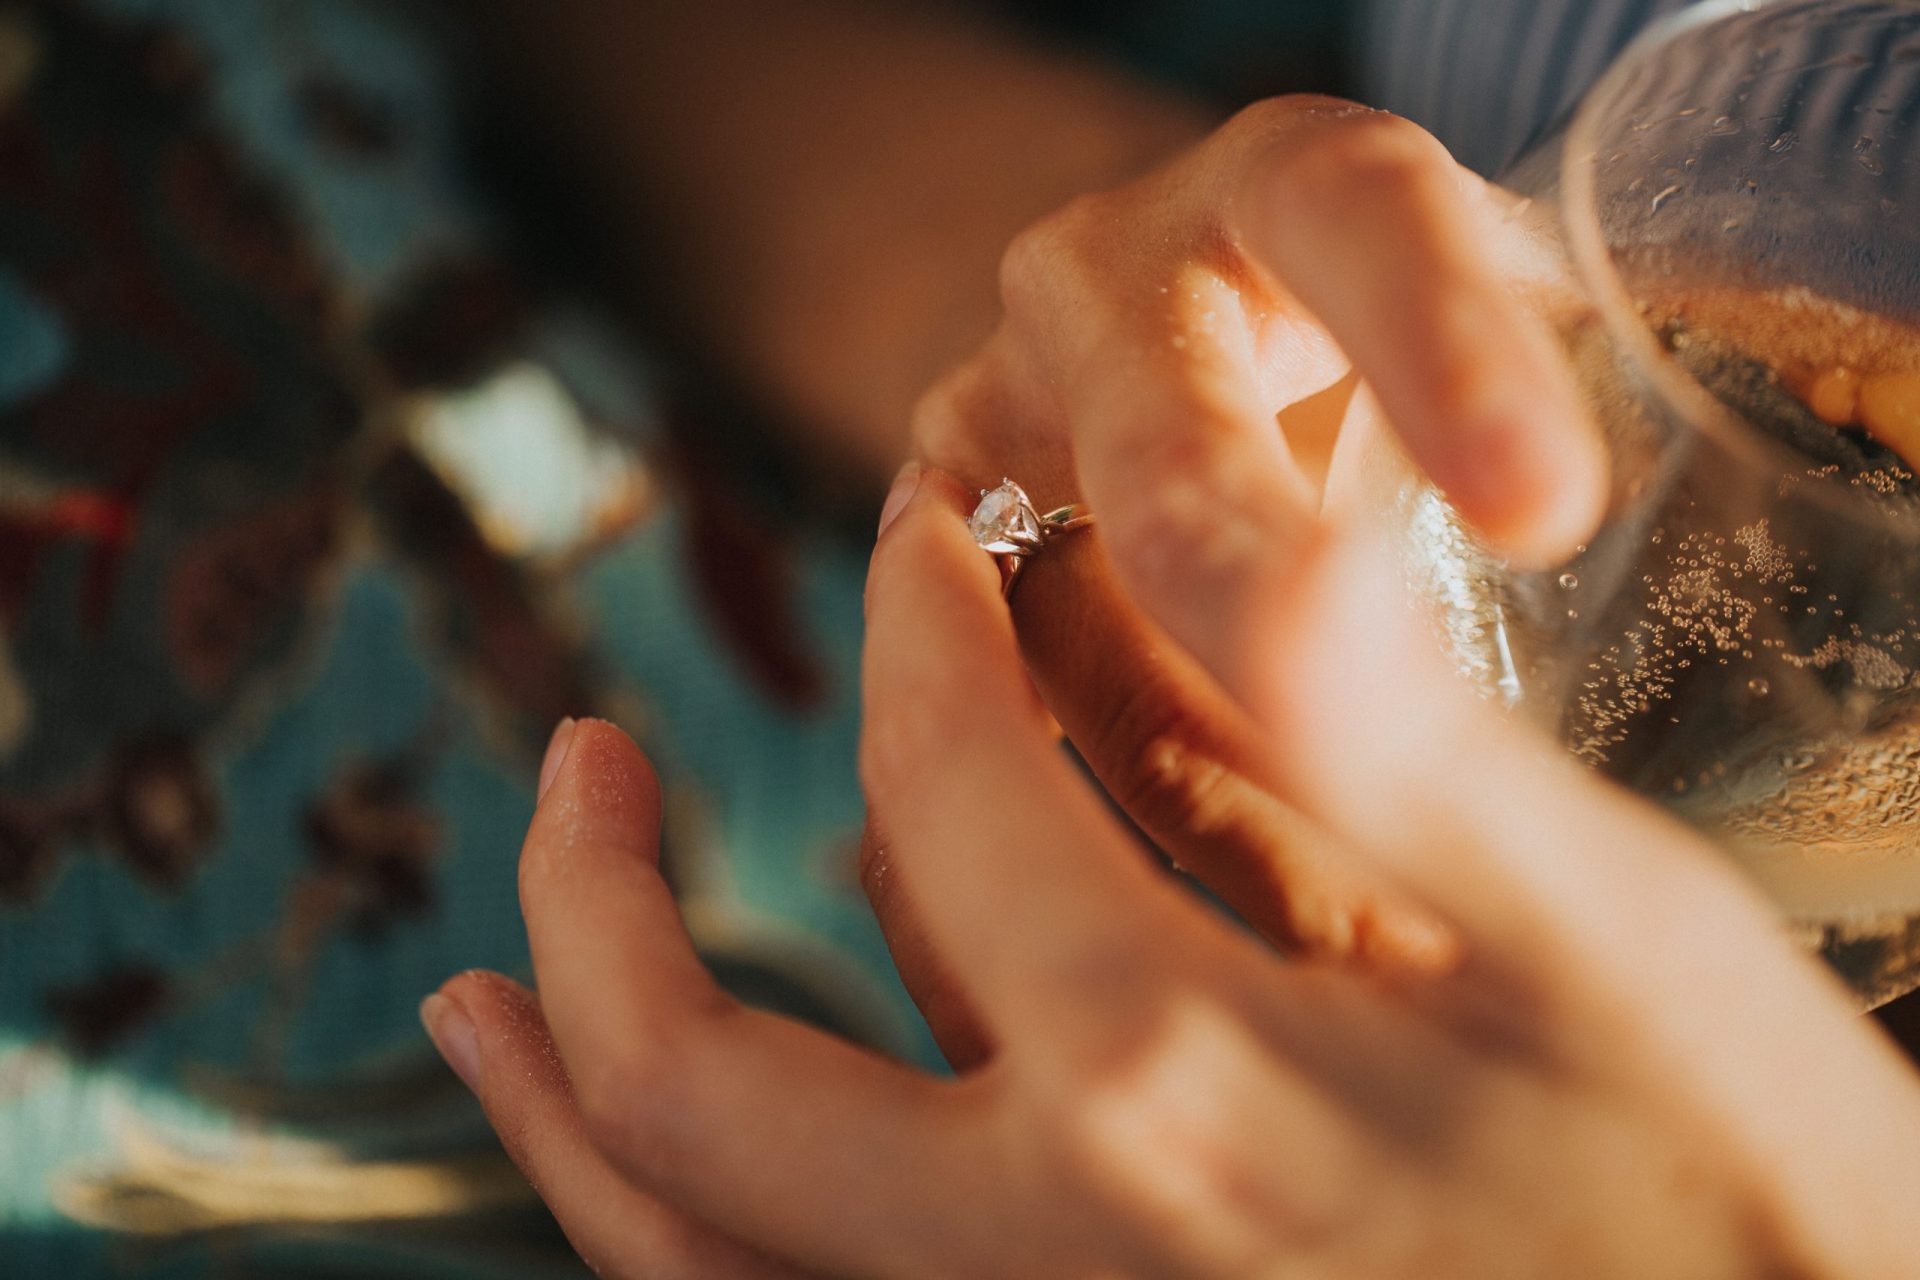 Close-up of two hands holding a glass. One hand holds a wedding ring.